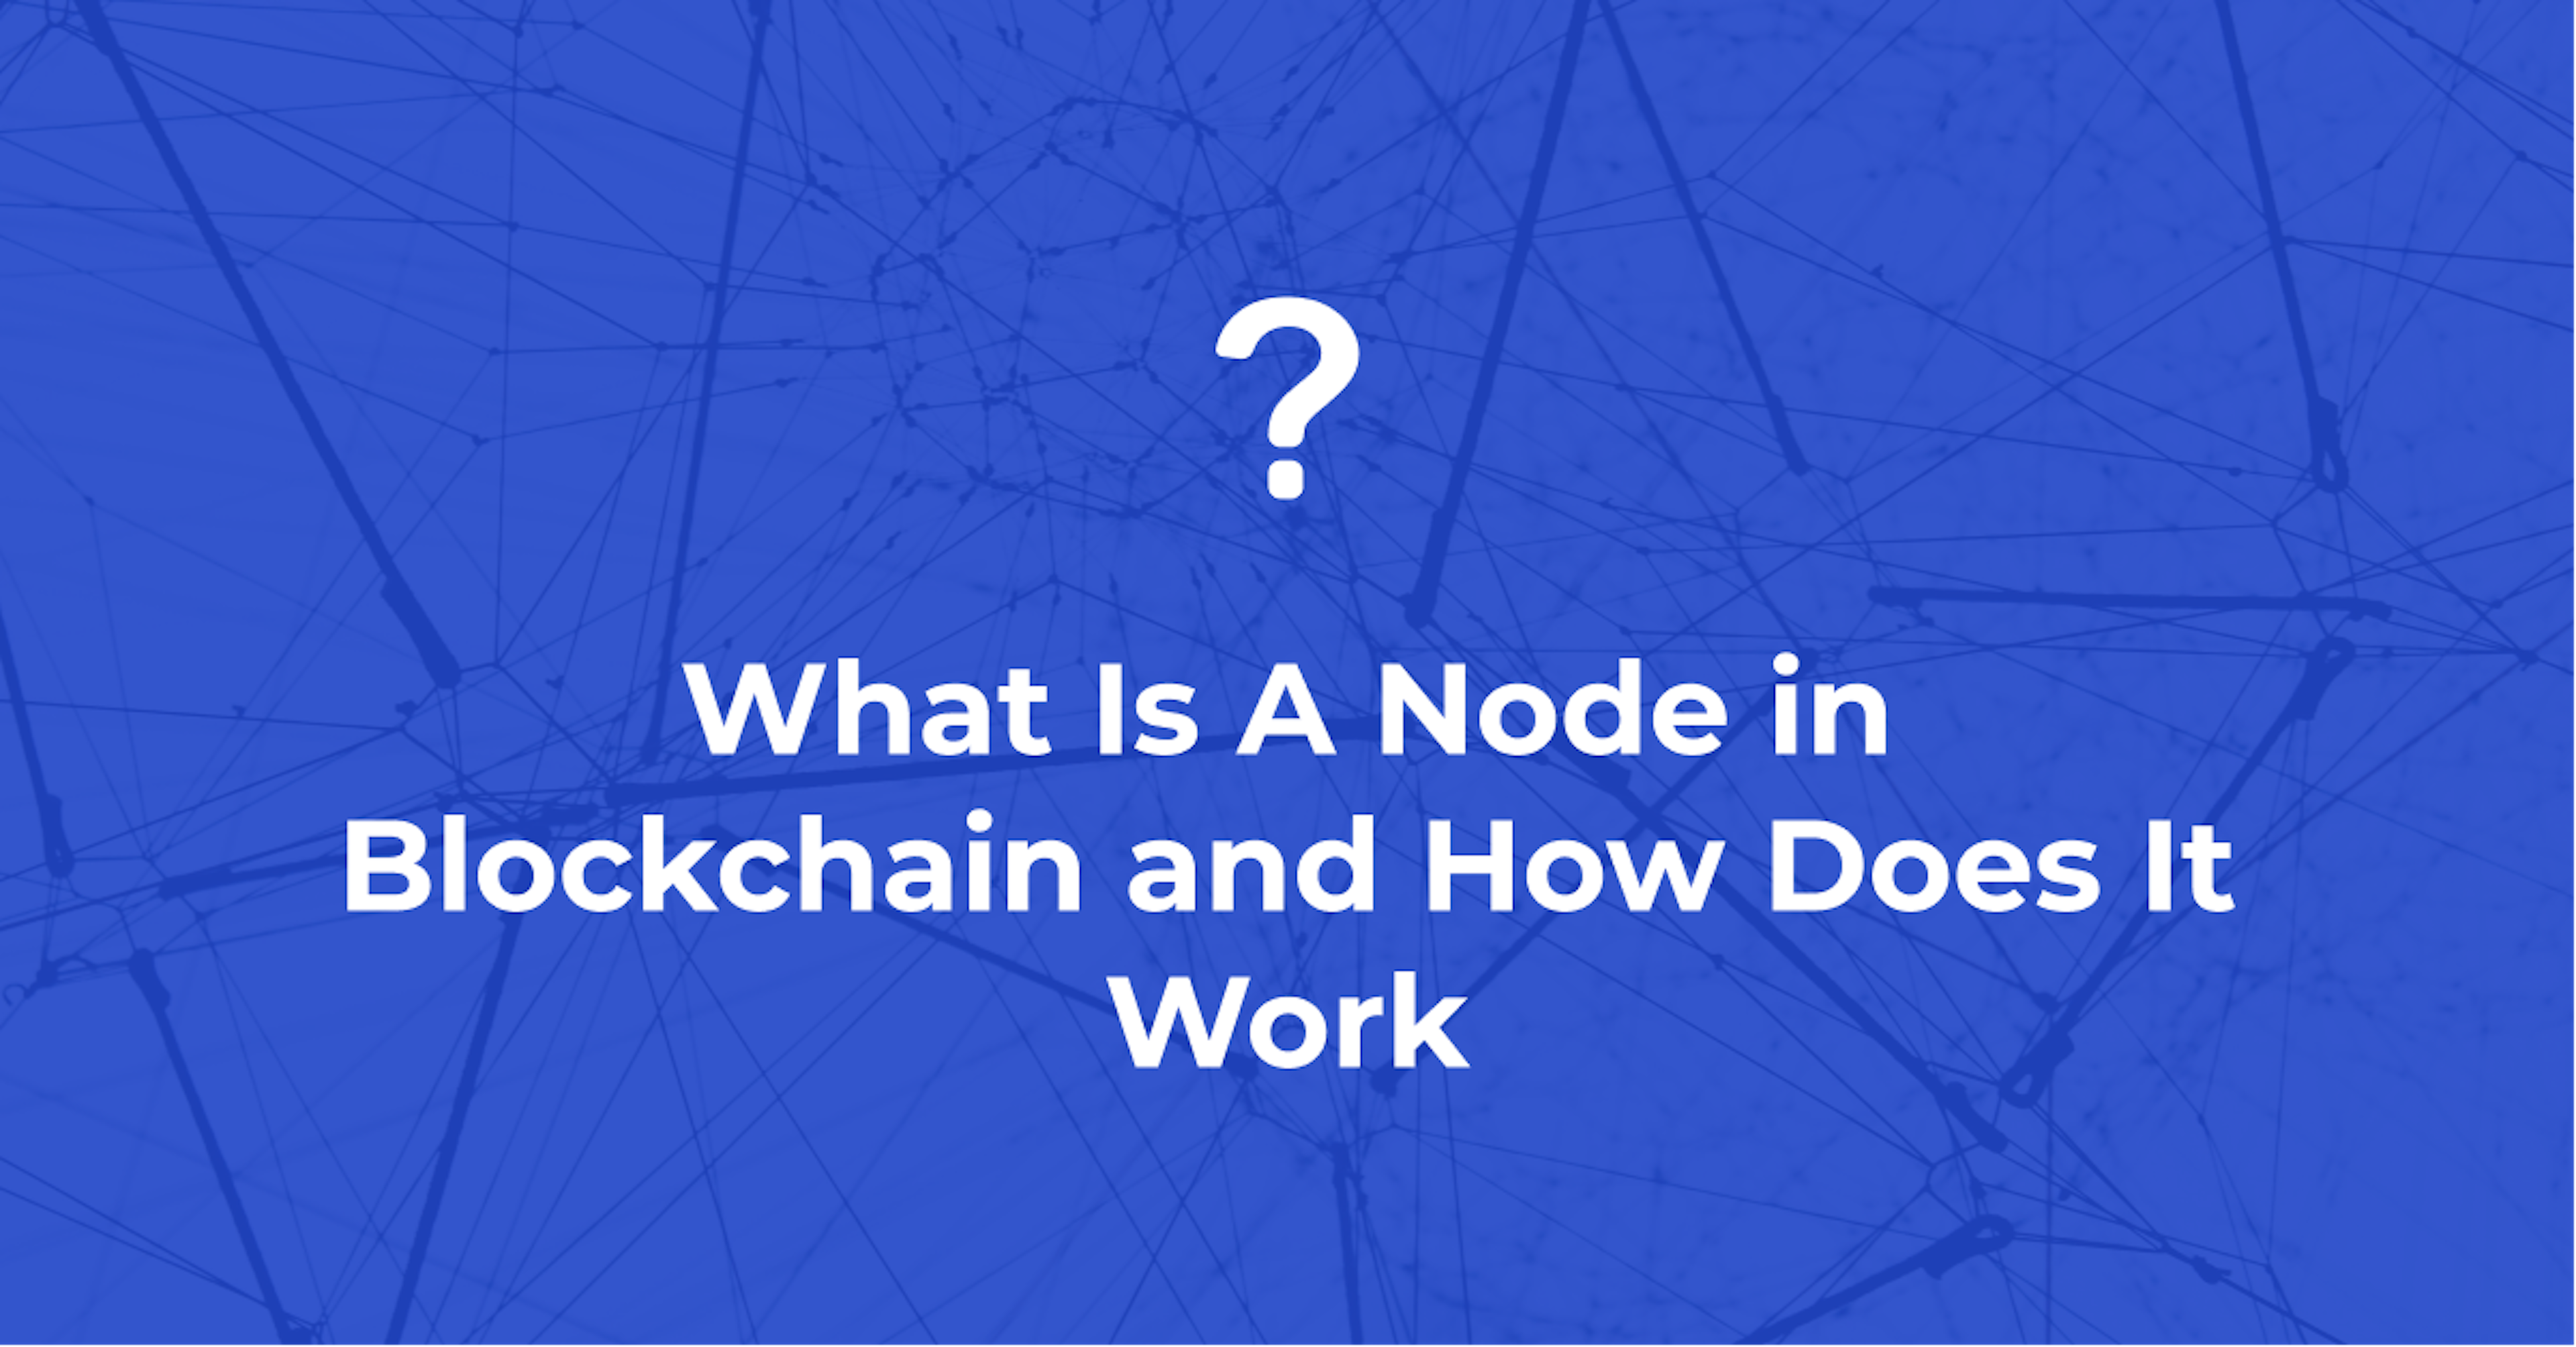 What Is A Node in Blockchain and How Does It Work?